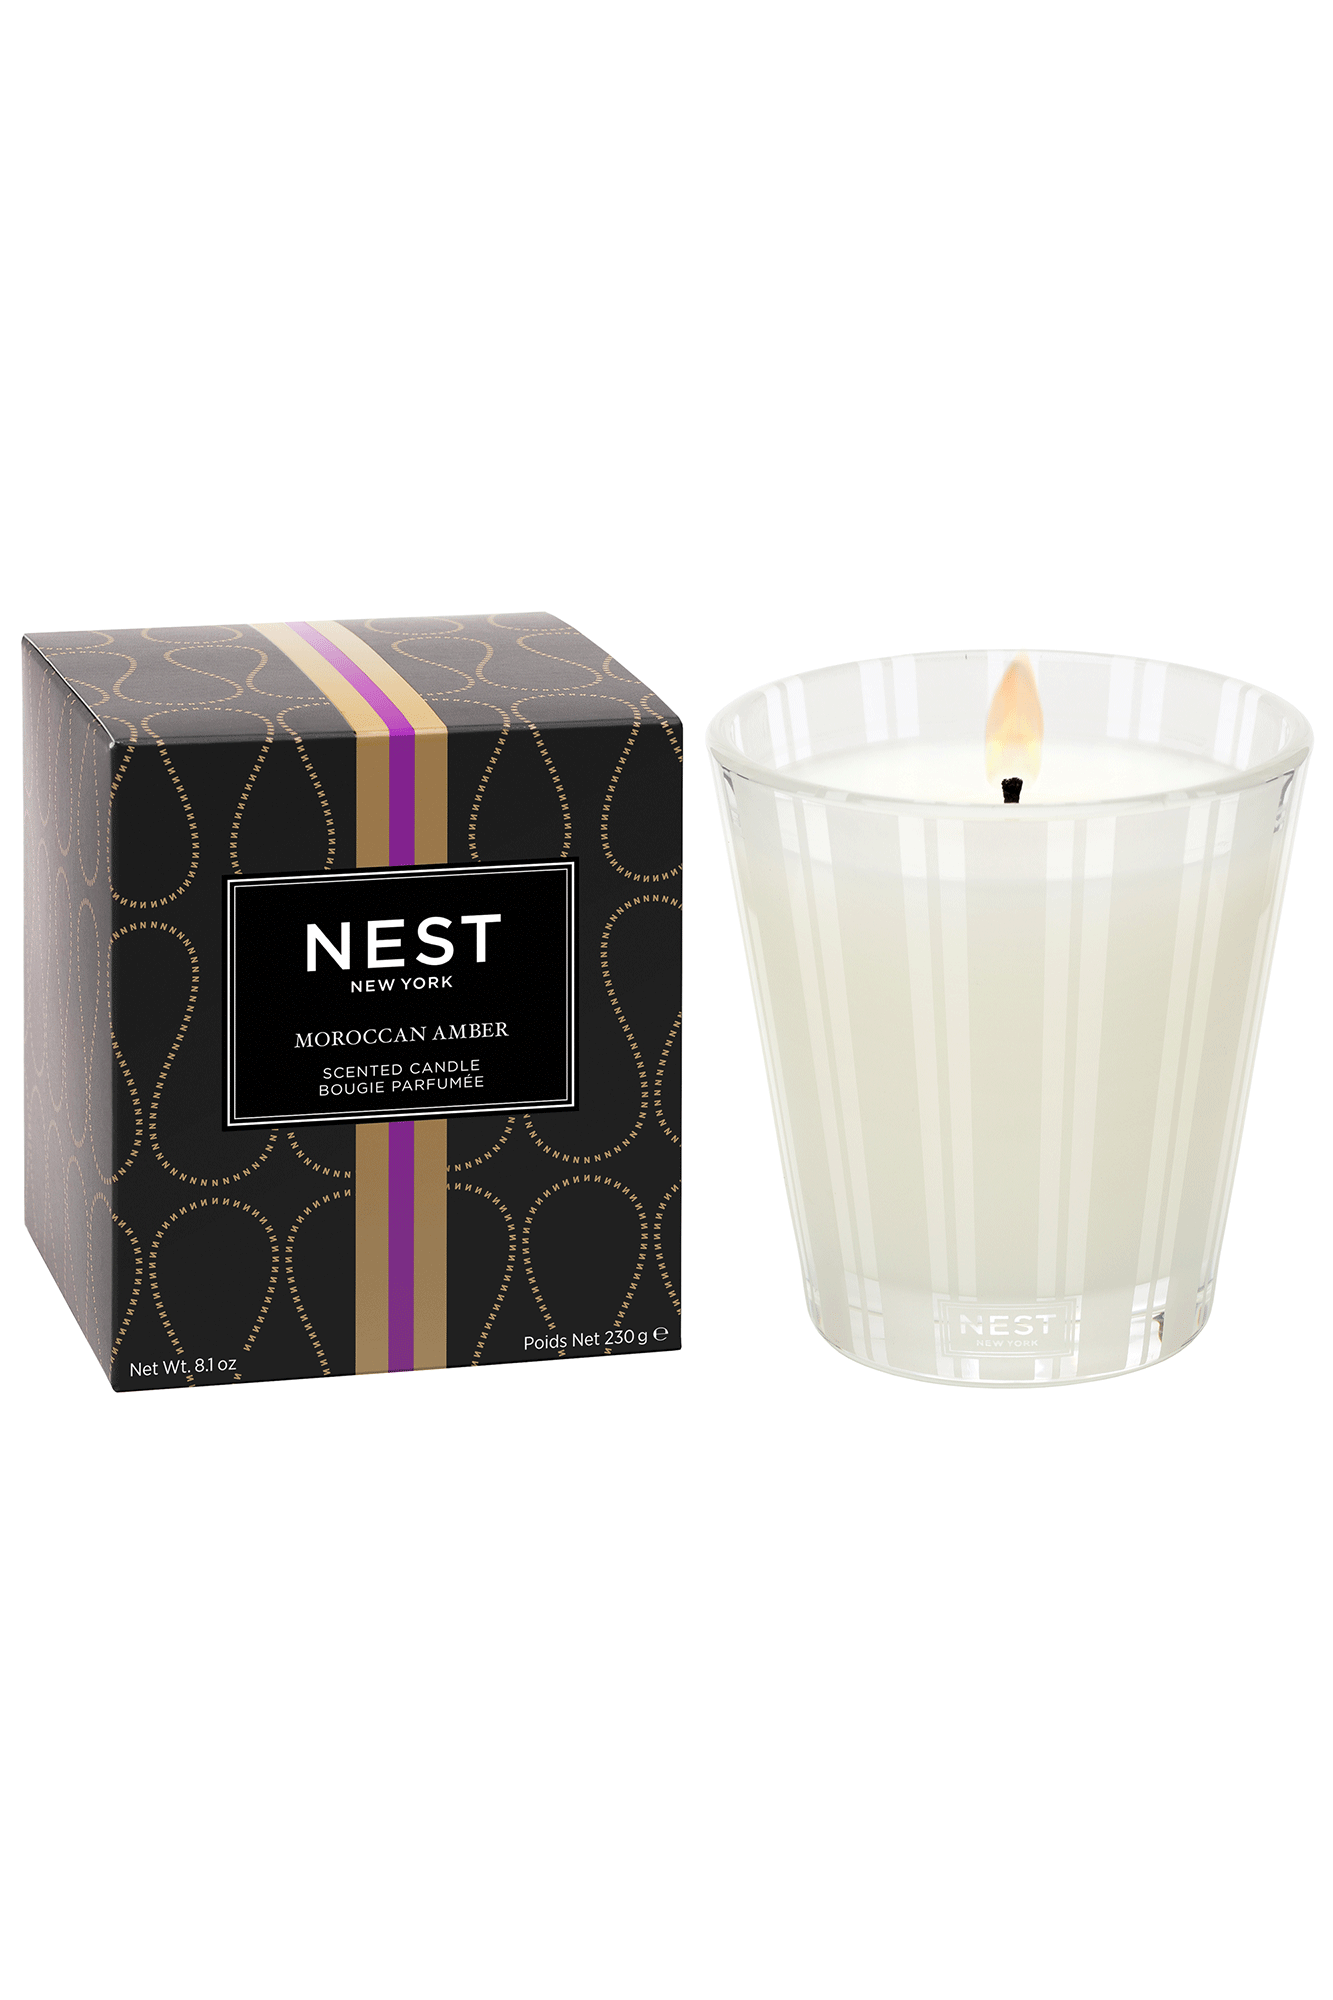 Bring exotic aromas into any room with this Moroccan Amber Classic Candle from Nest. Top notes of bergamot and eucalyptus mix with sweet patchouli and heliotrope, culminating in a sensual base of amber. Create an inviting atmosphere that's perfect for any occasion.